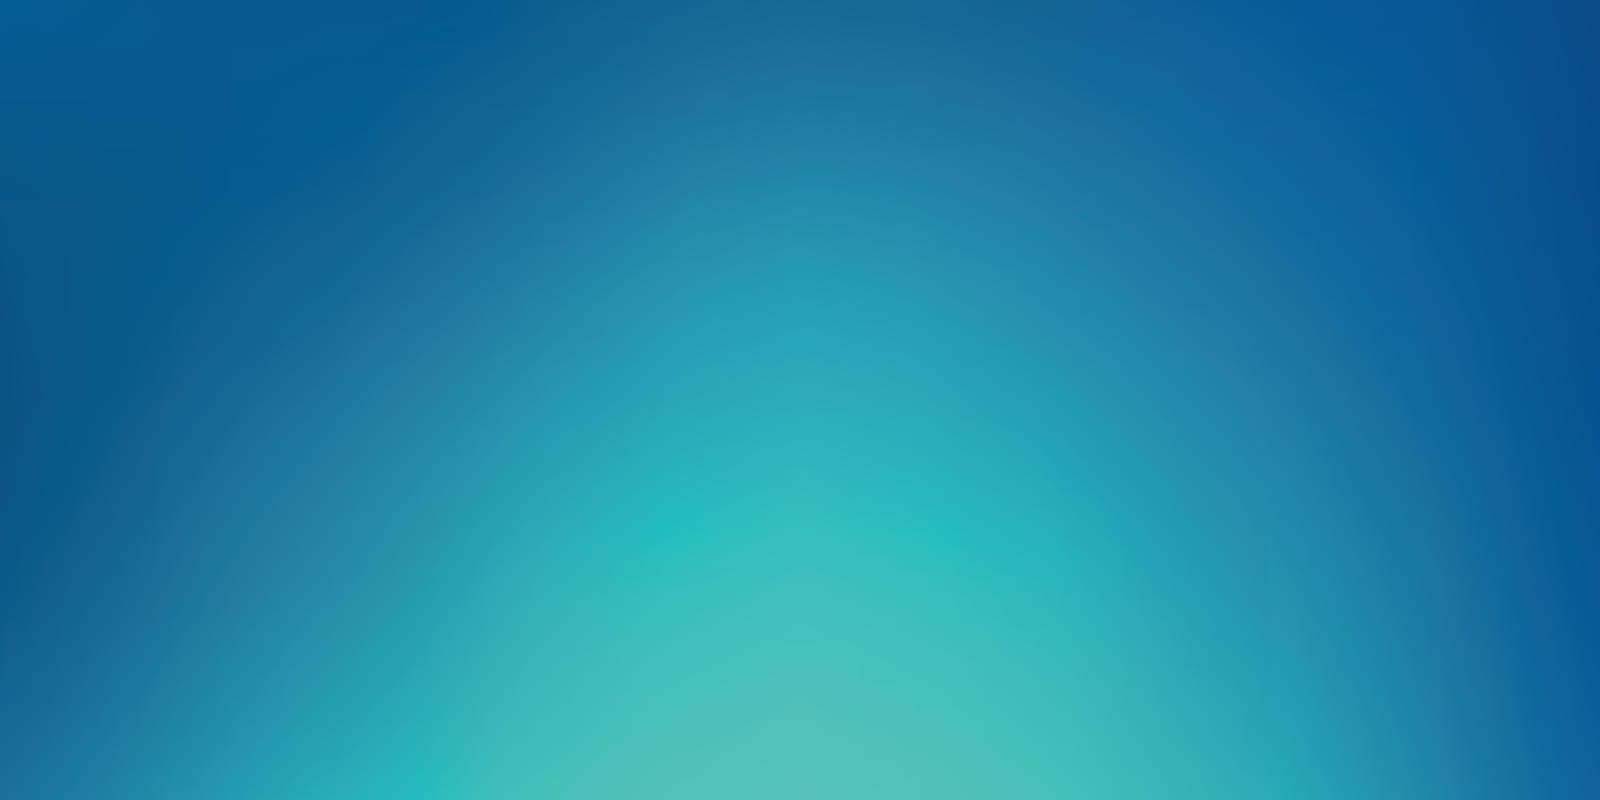 illustration of abstract gradient from bright blue to deep blue color background template